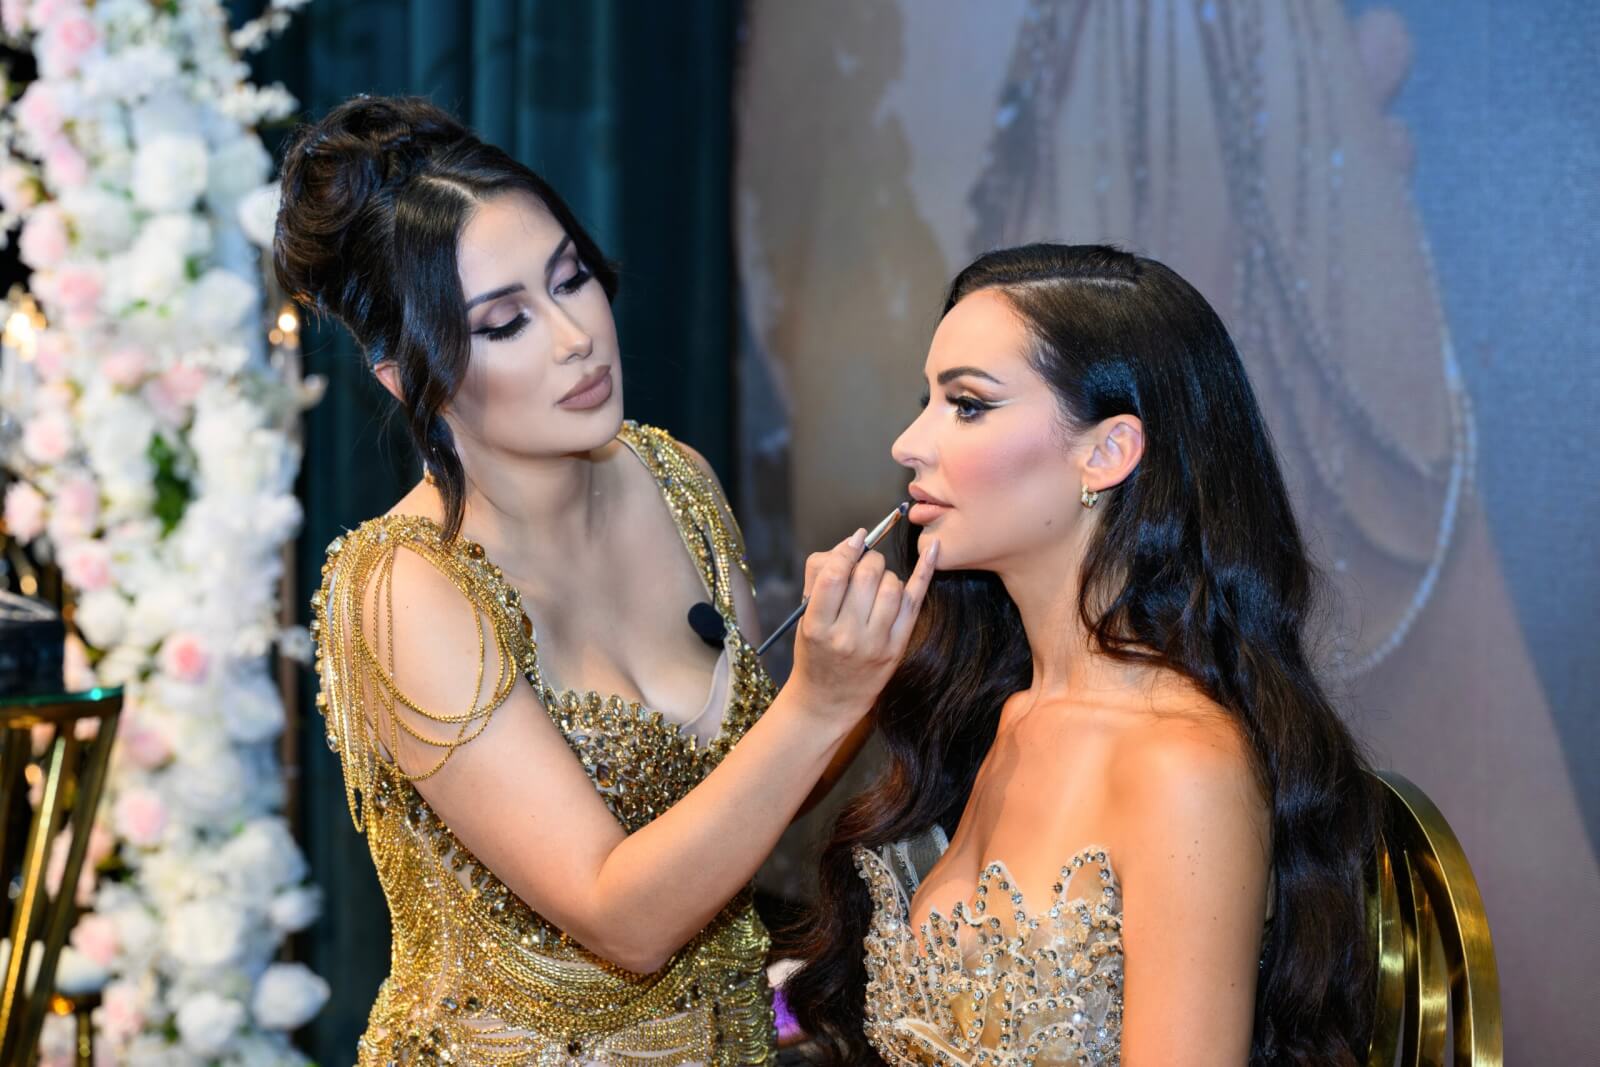 DressYourFace New York's Masterclass Was A 360 Celebration Of Beauty Empowerment: Tamanna greets her special guest model Carli Bybel on stage and gets ready for the full bridal makeup session